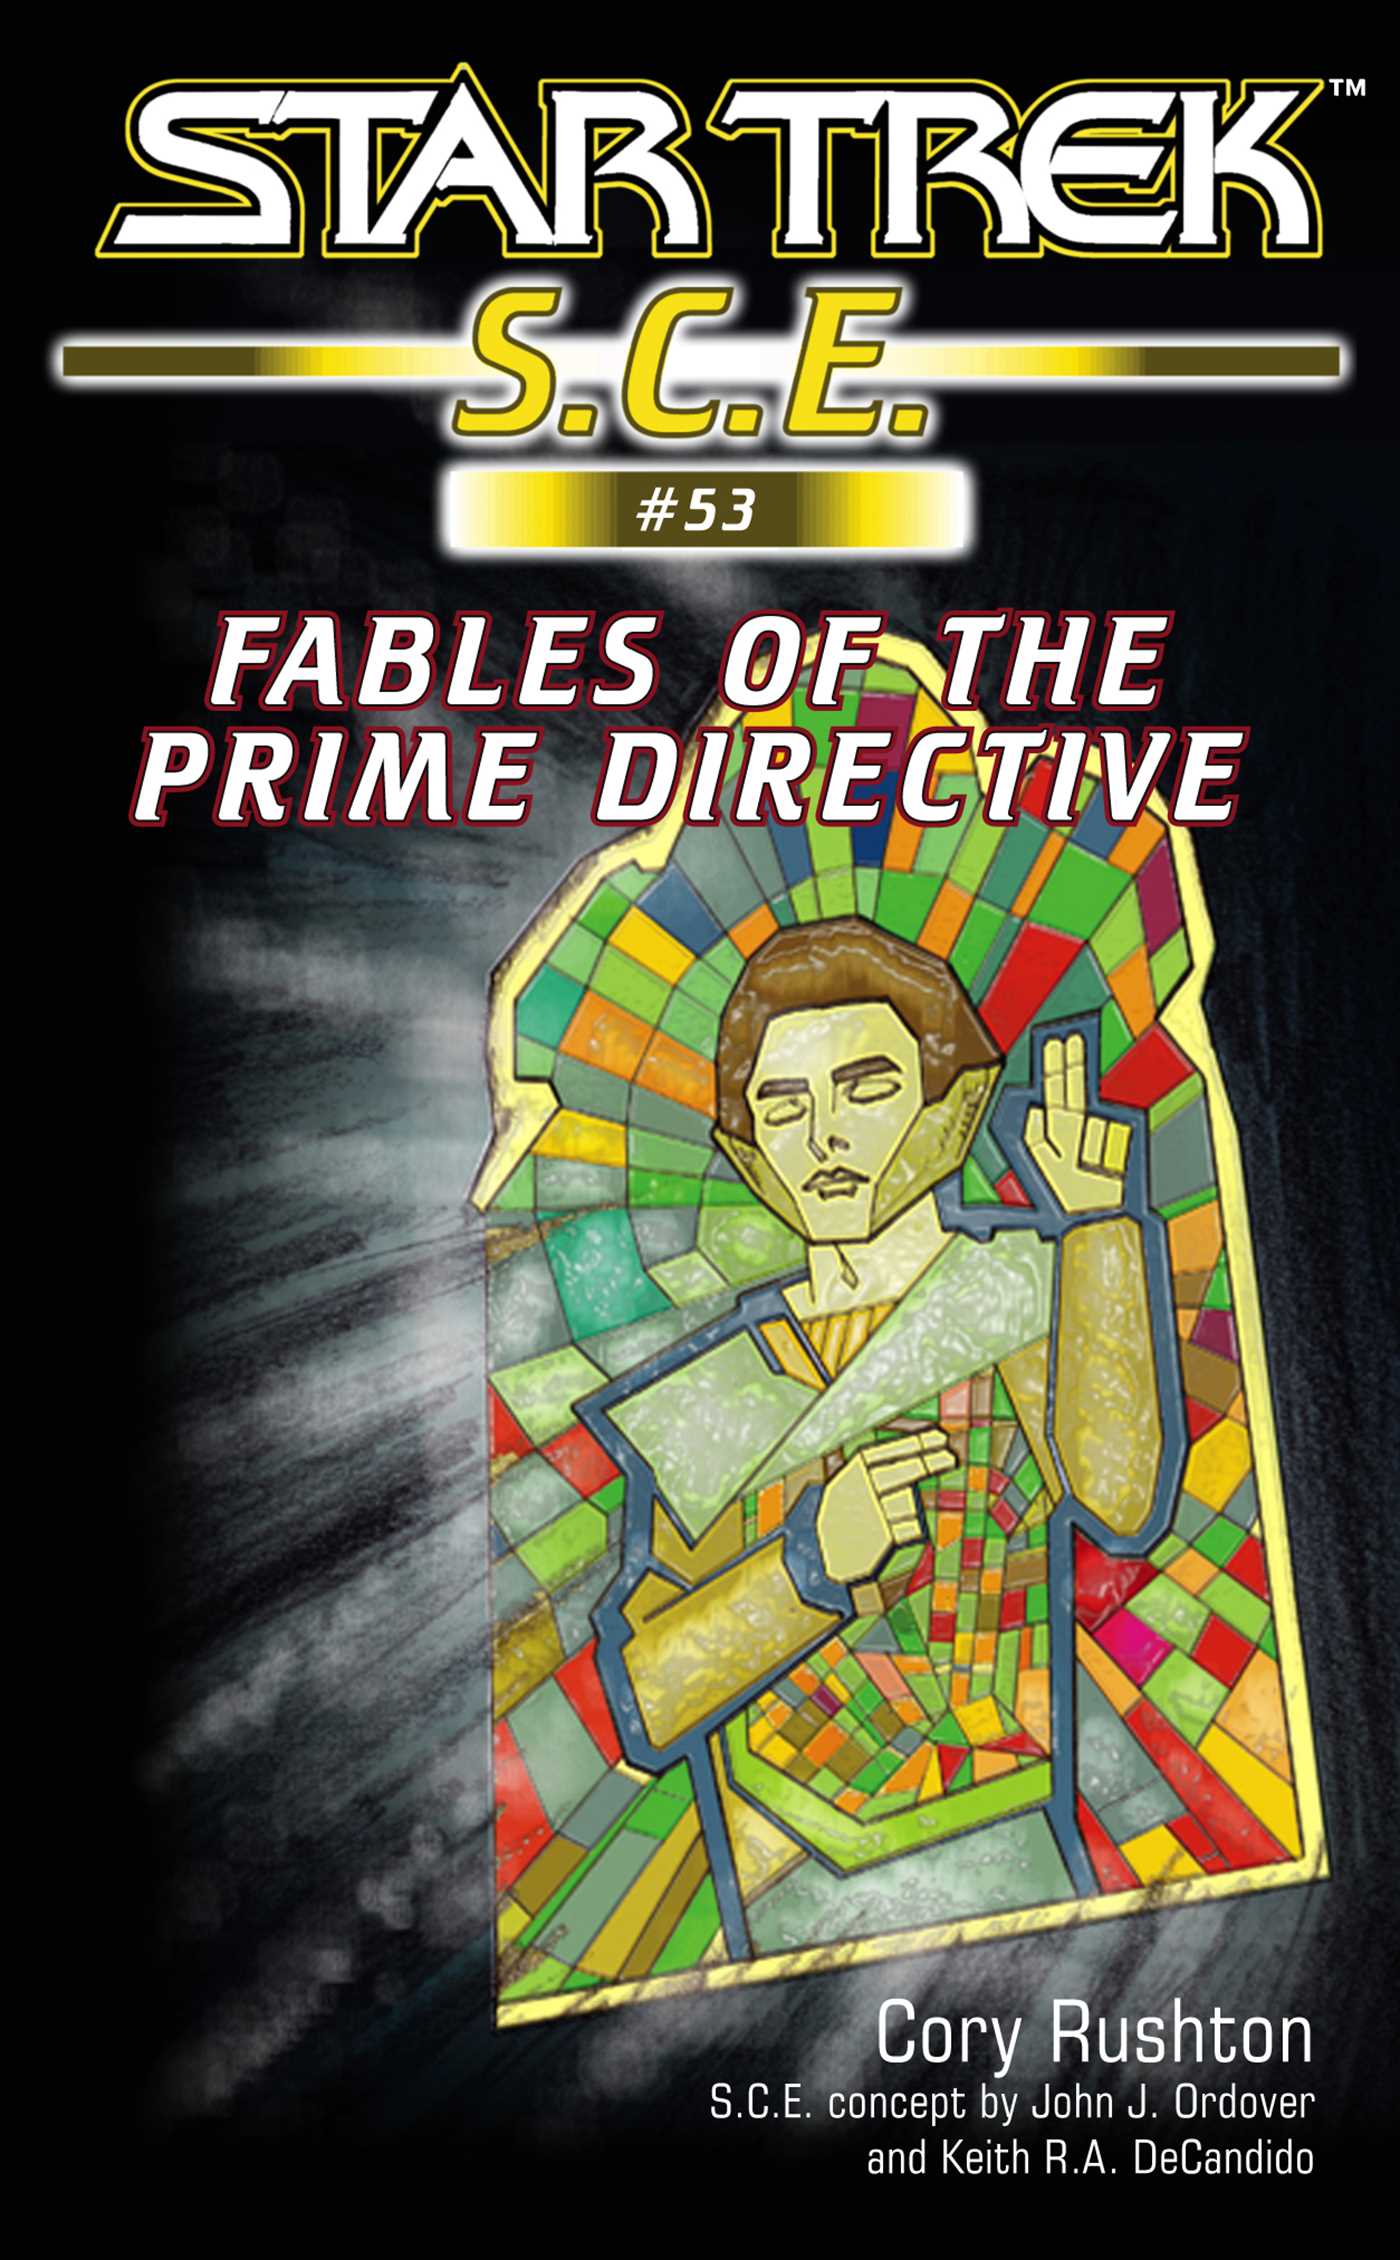 Fables of the Prime Directive